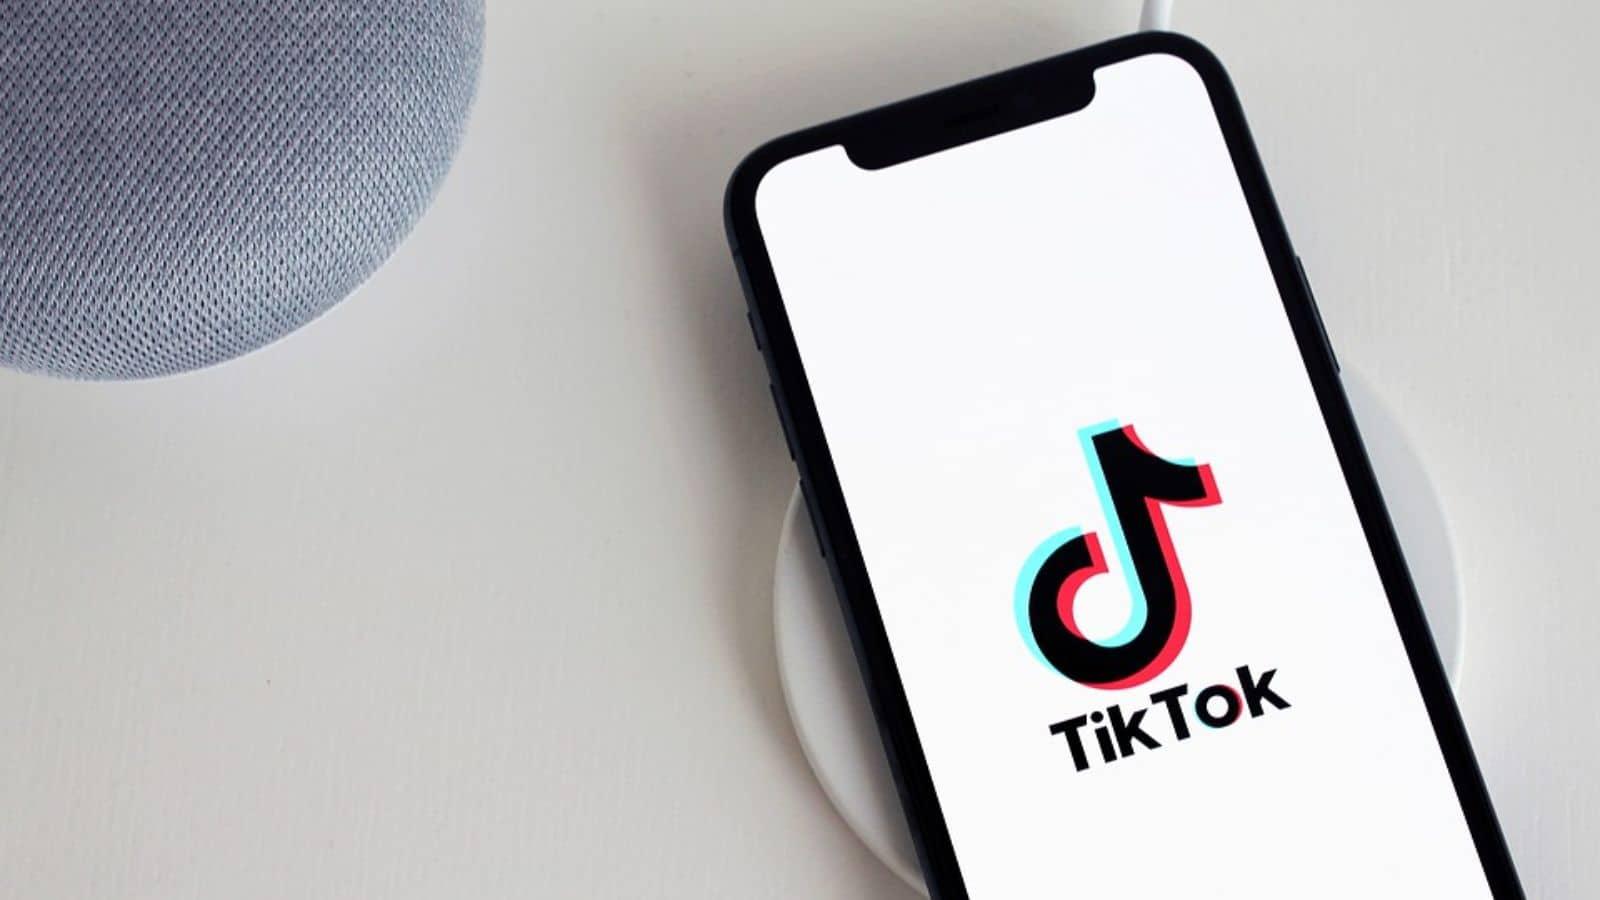 What Counts as a View? (, Facebook, Instagram, TikTok)